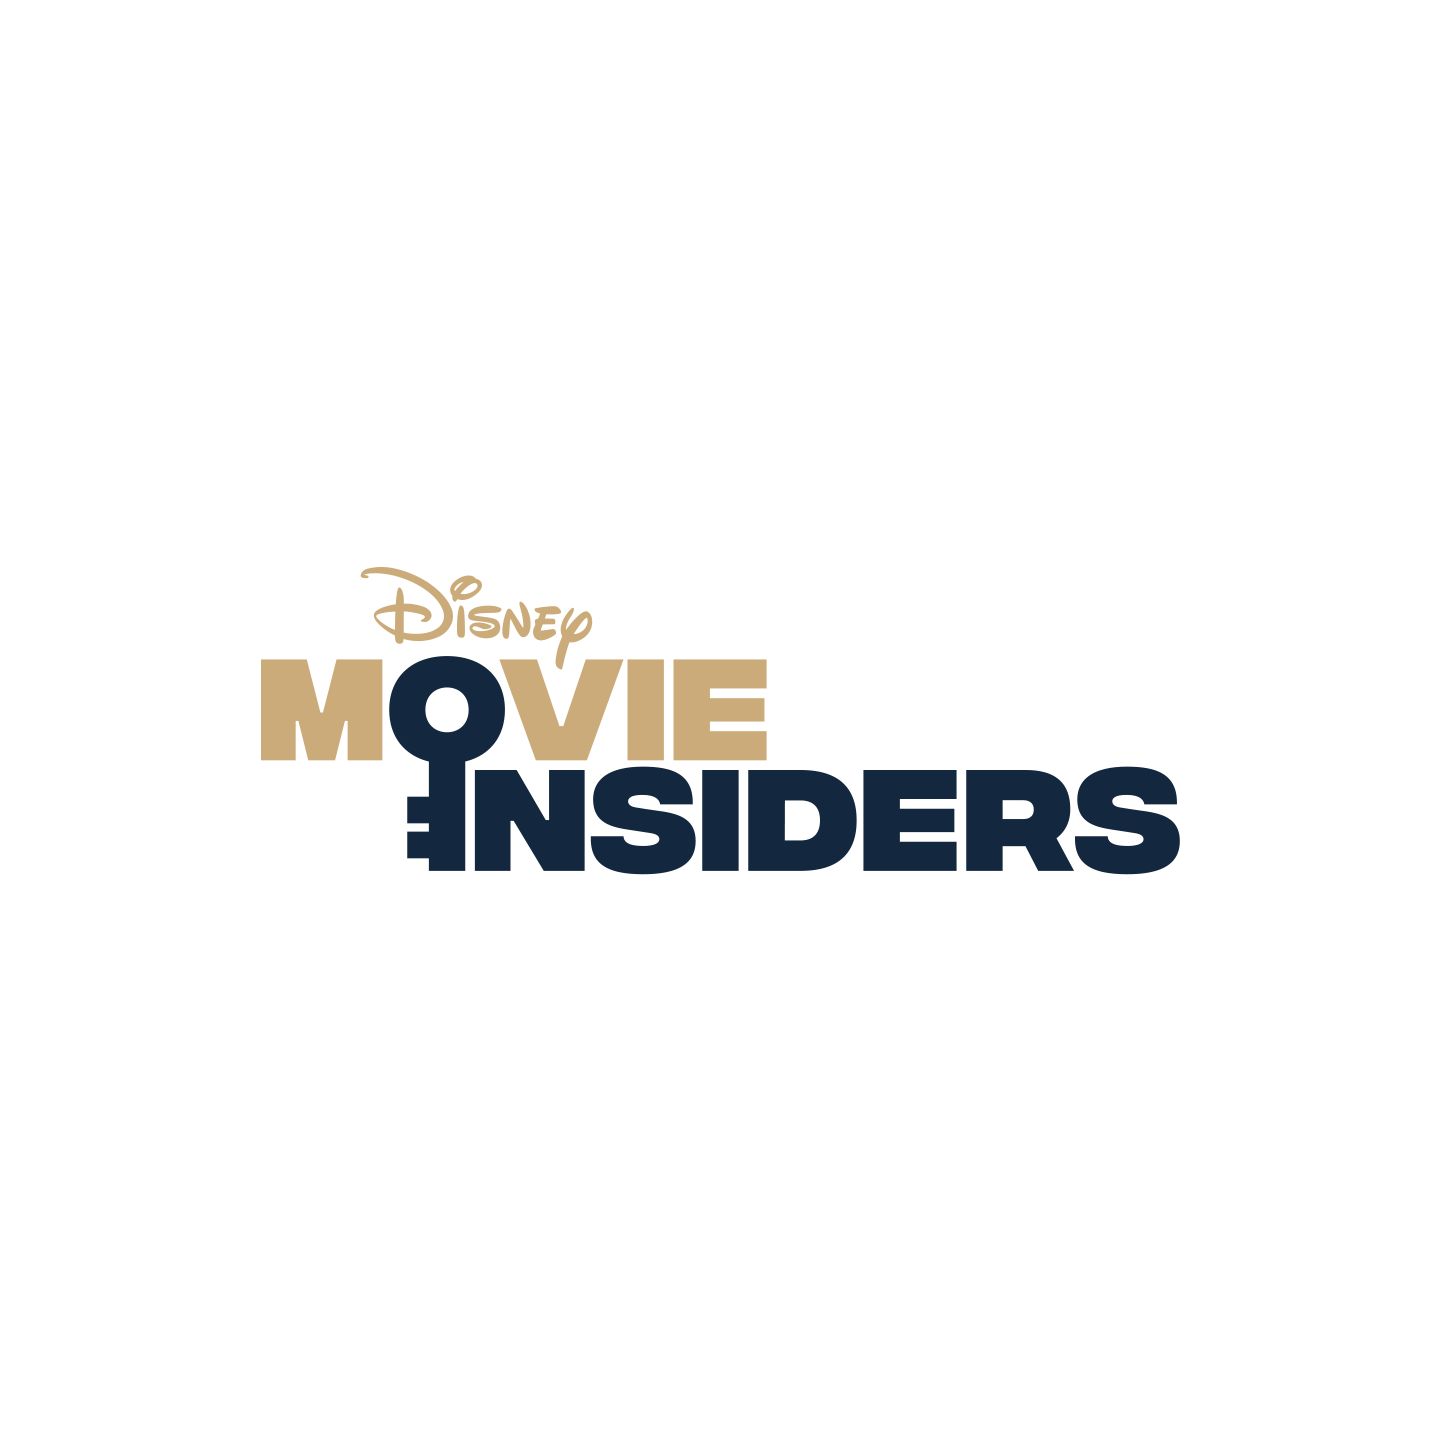 Disney Movie Insiders Presents - LUCA - Join us for unforgettable journey with the filmmakers and voice cast from Pixar's latest movie. LEARN MORE